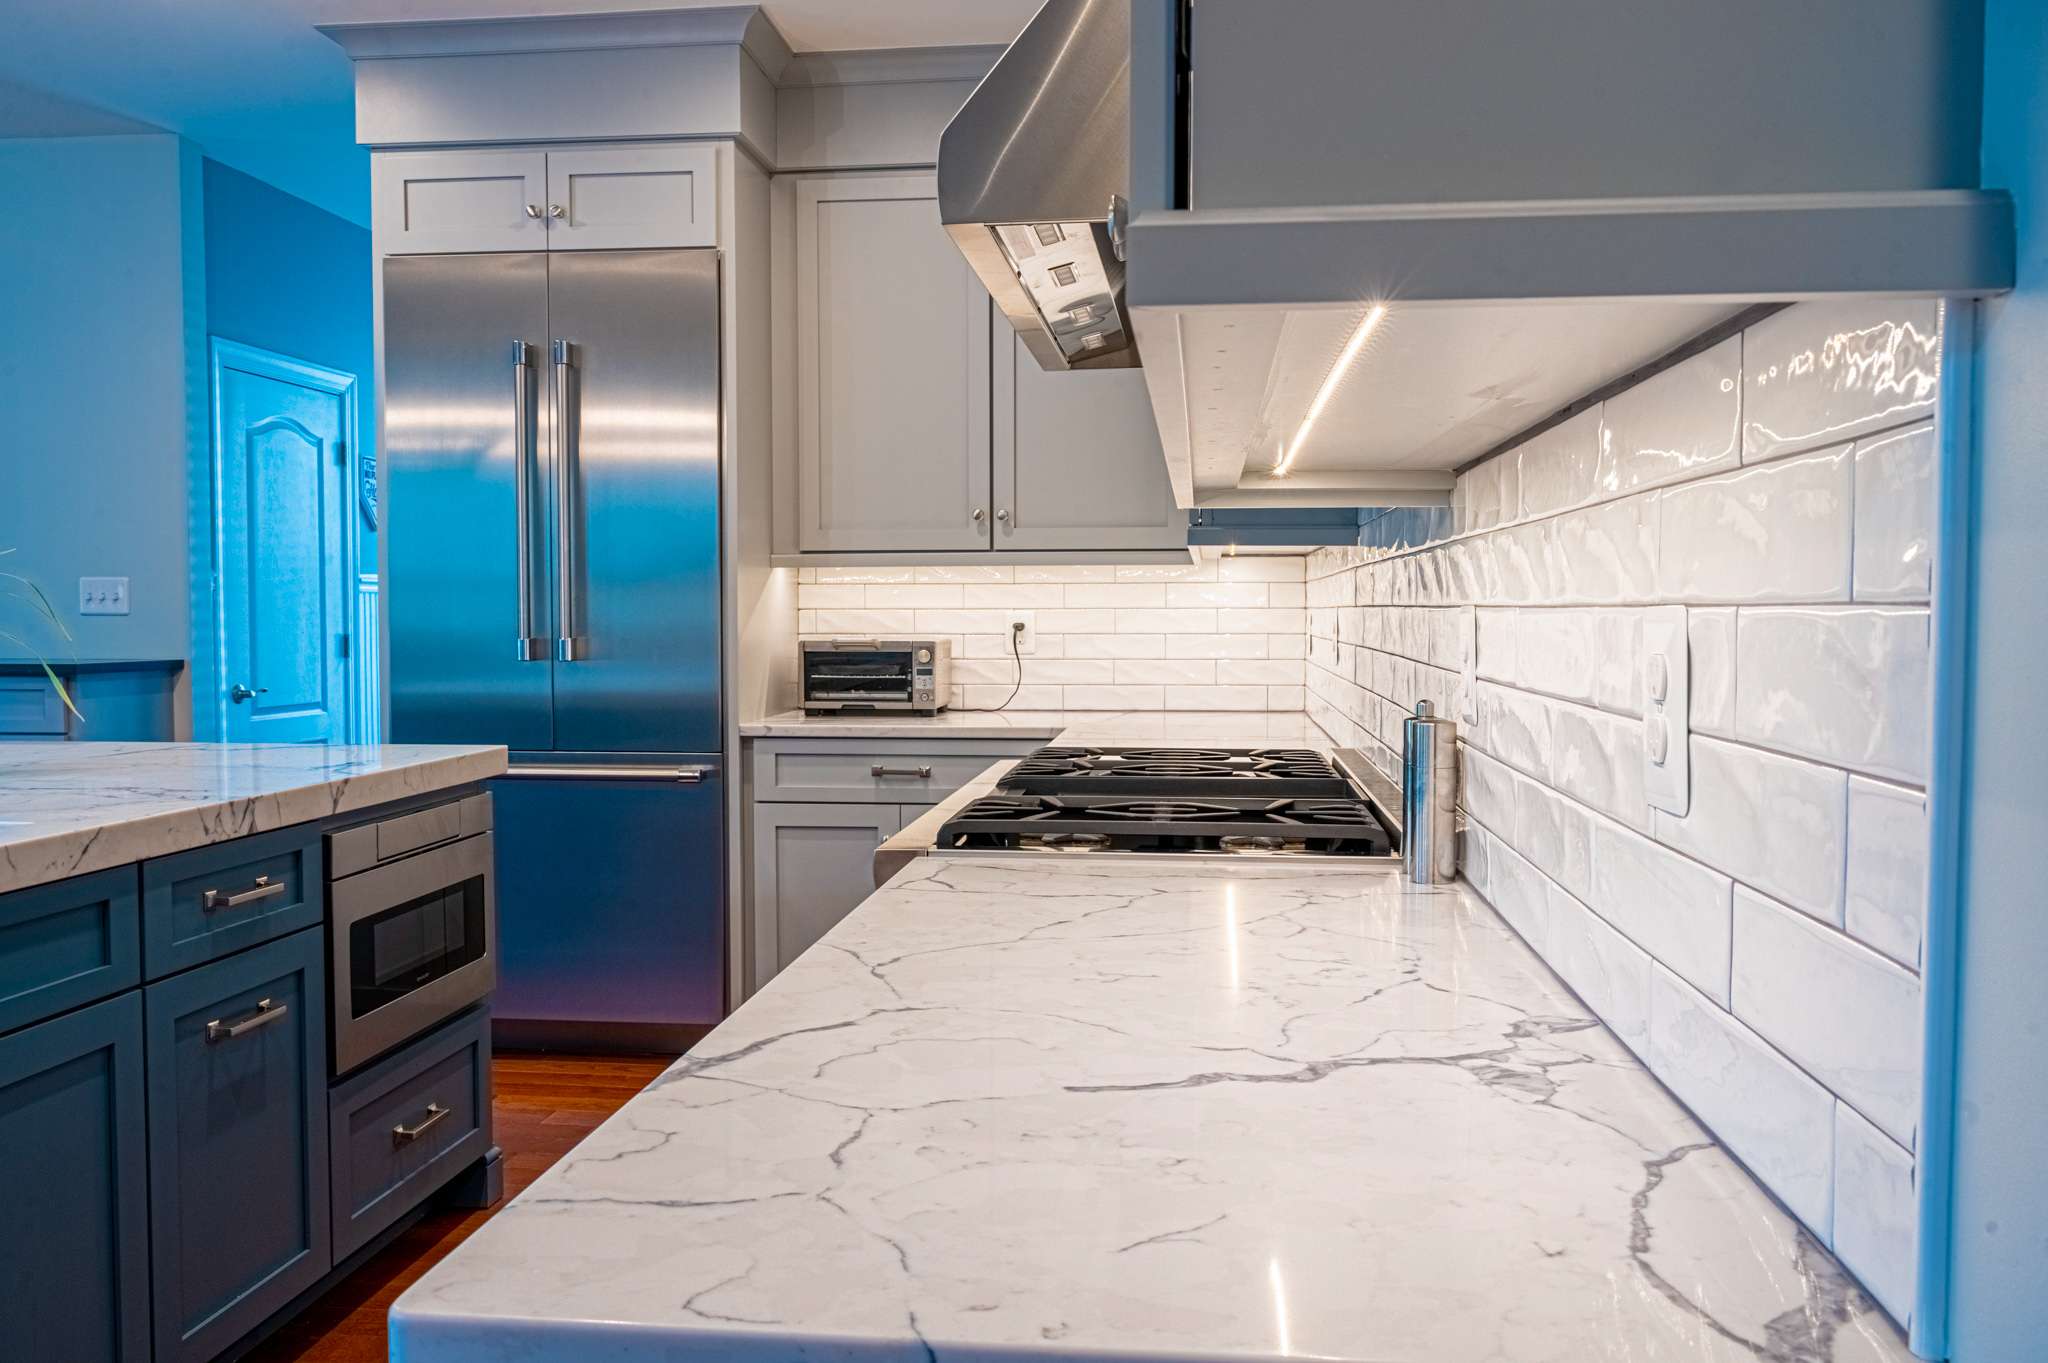 White and black marble countertop with white tile backsplash in kitchen